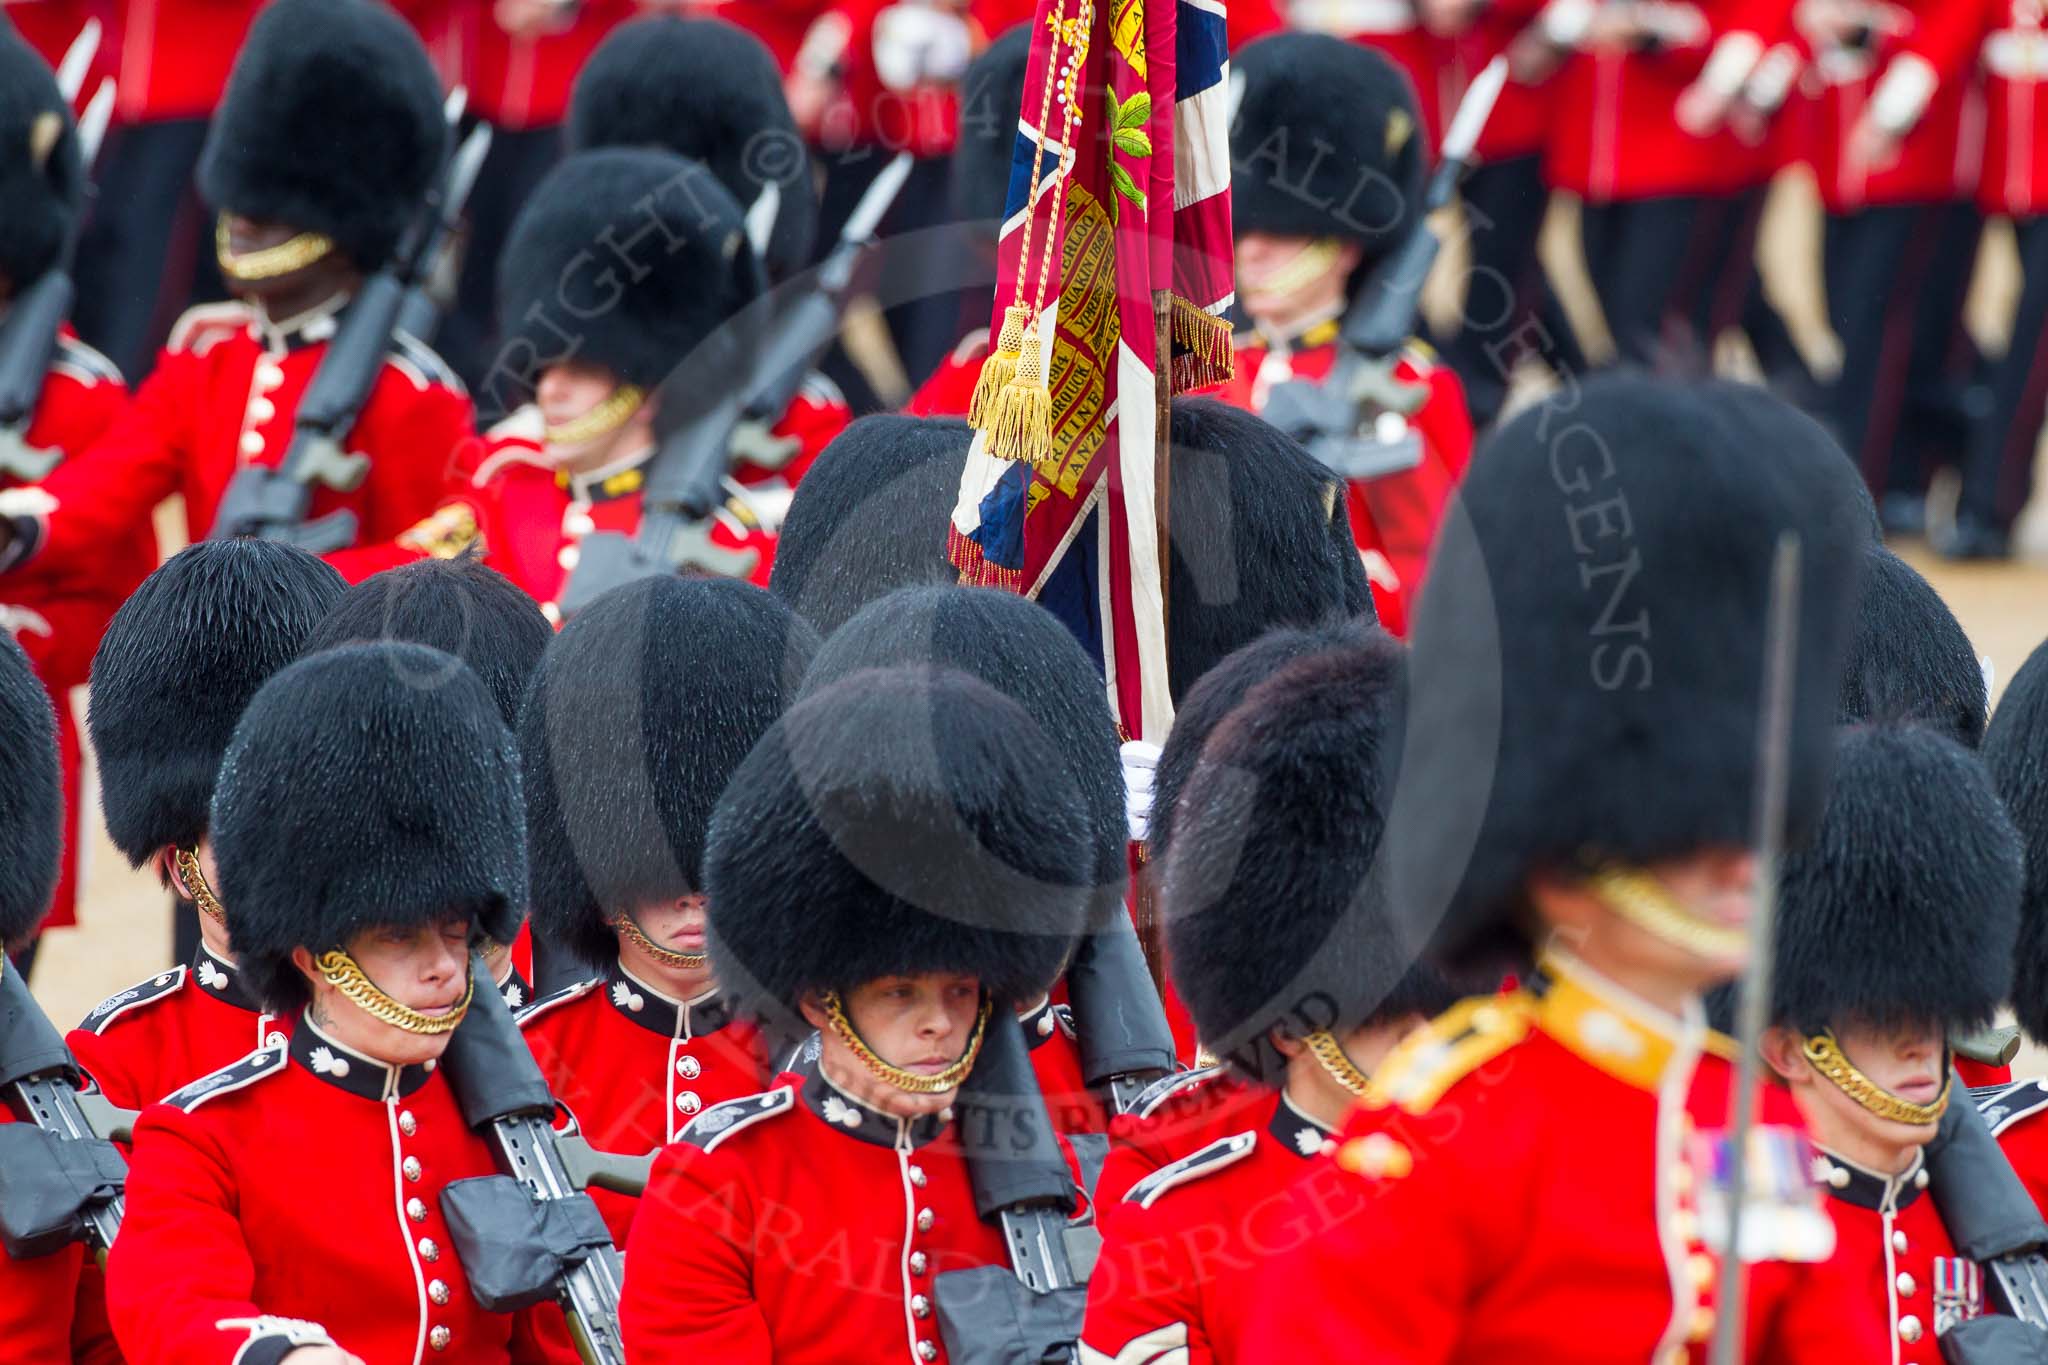 The Colonel's Review 2014.
Horse Guards Parade, Westminster,
London,

United Kingdom,
on 07 June 2014 at 11:43, image #545